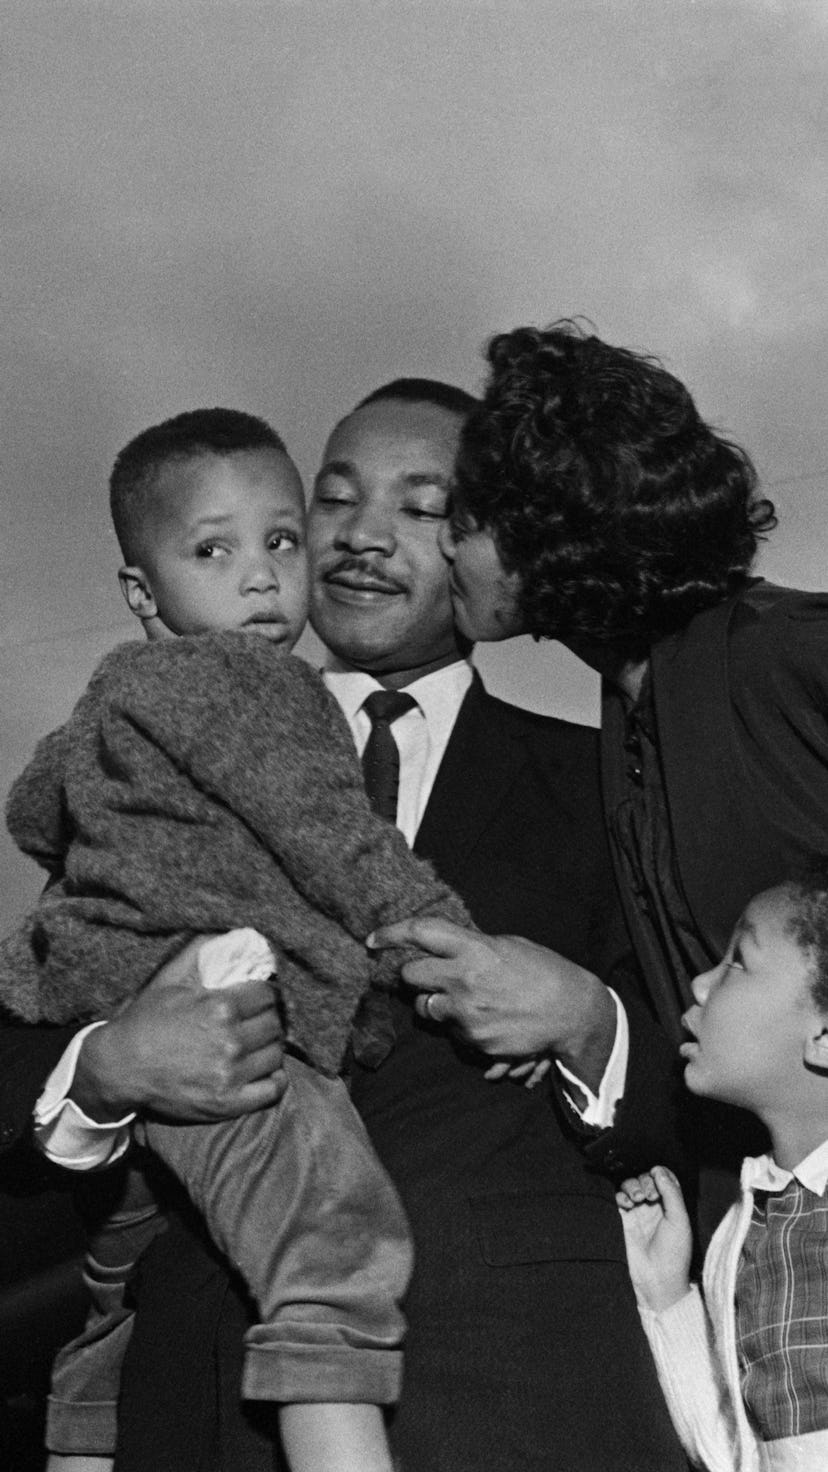 Martin Luther King Jr. was a proud dad, as evidenced by his quotes and photos with his children.